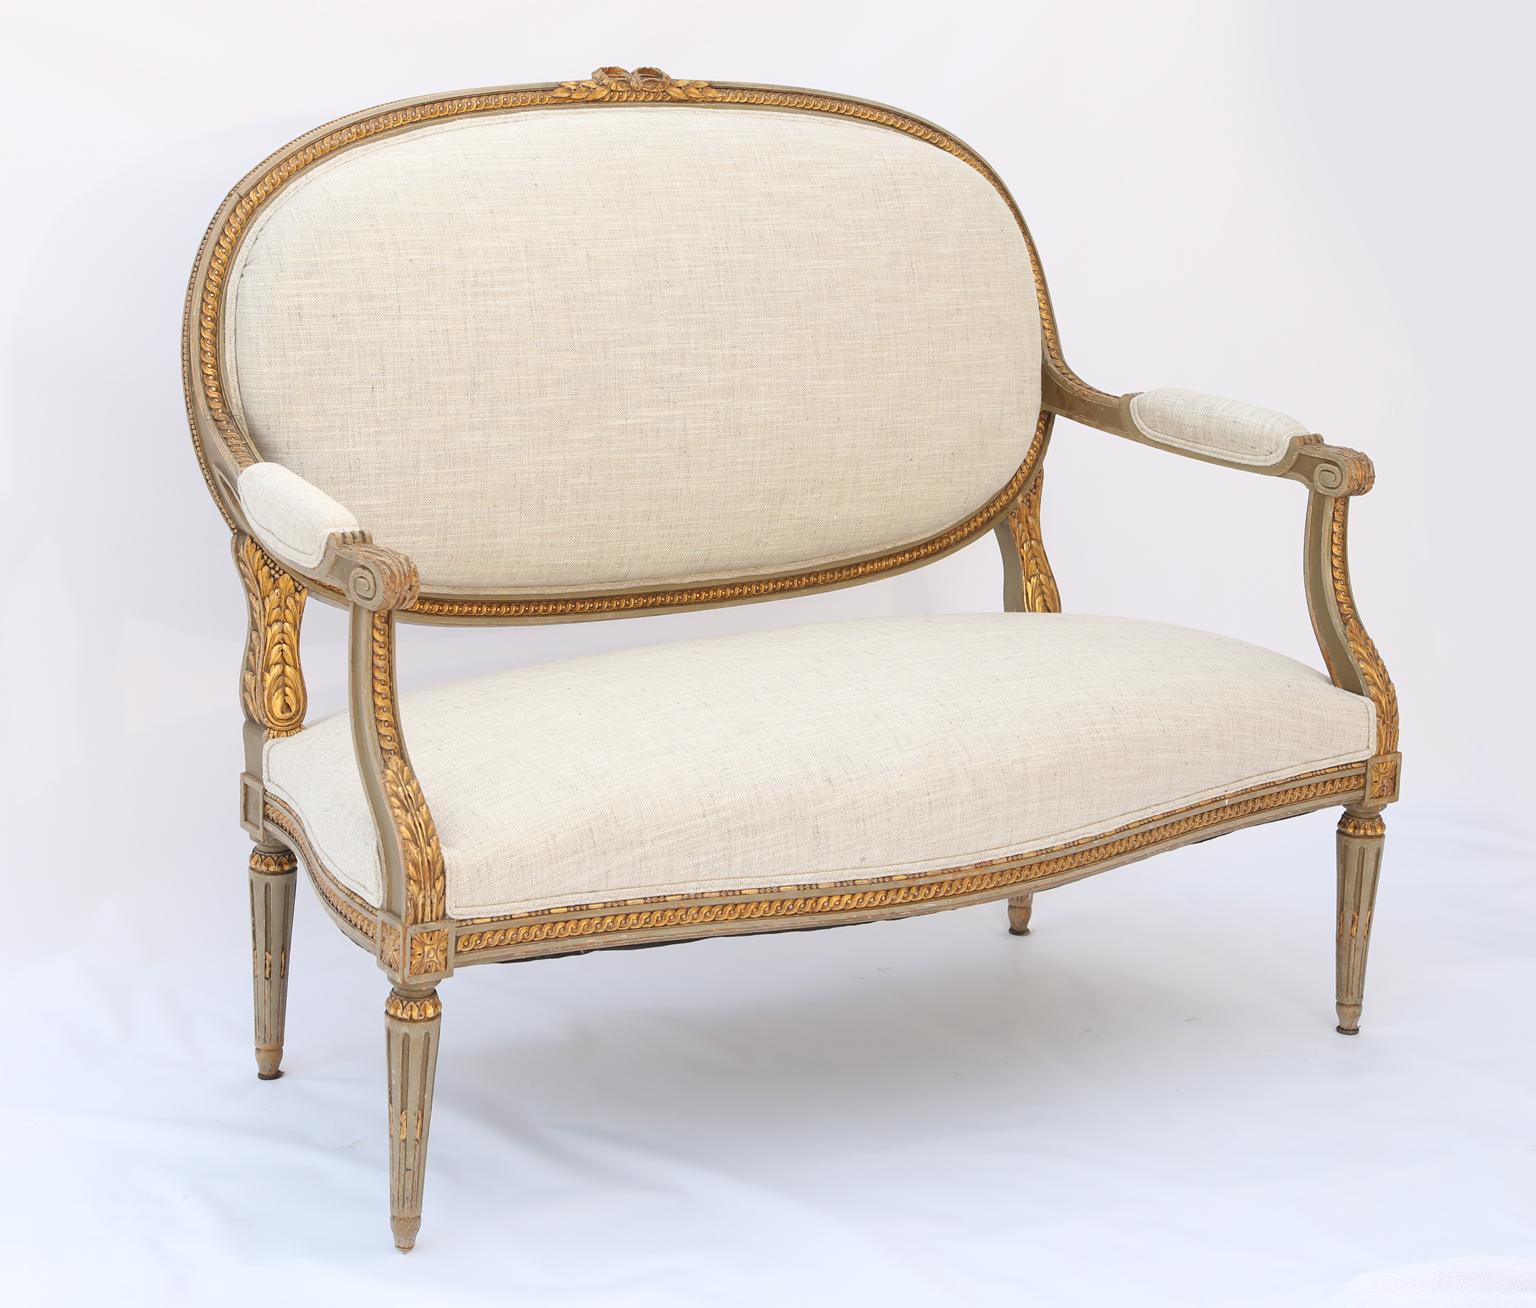 Hand-Carved Louis XVI Giltwood 19th French Century Settee in Linen